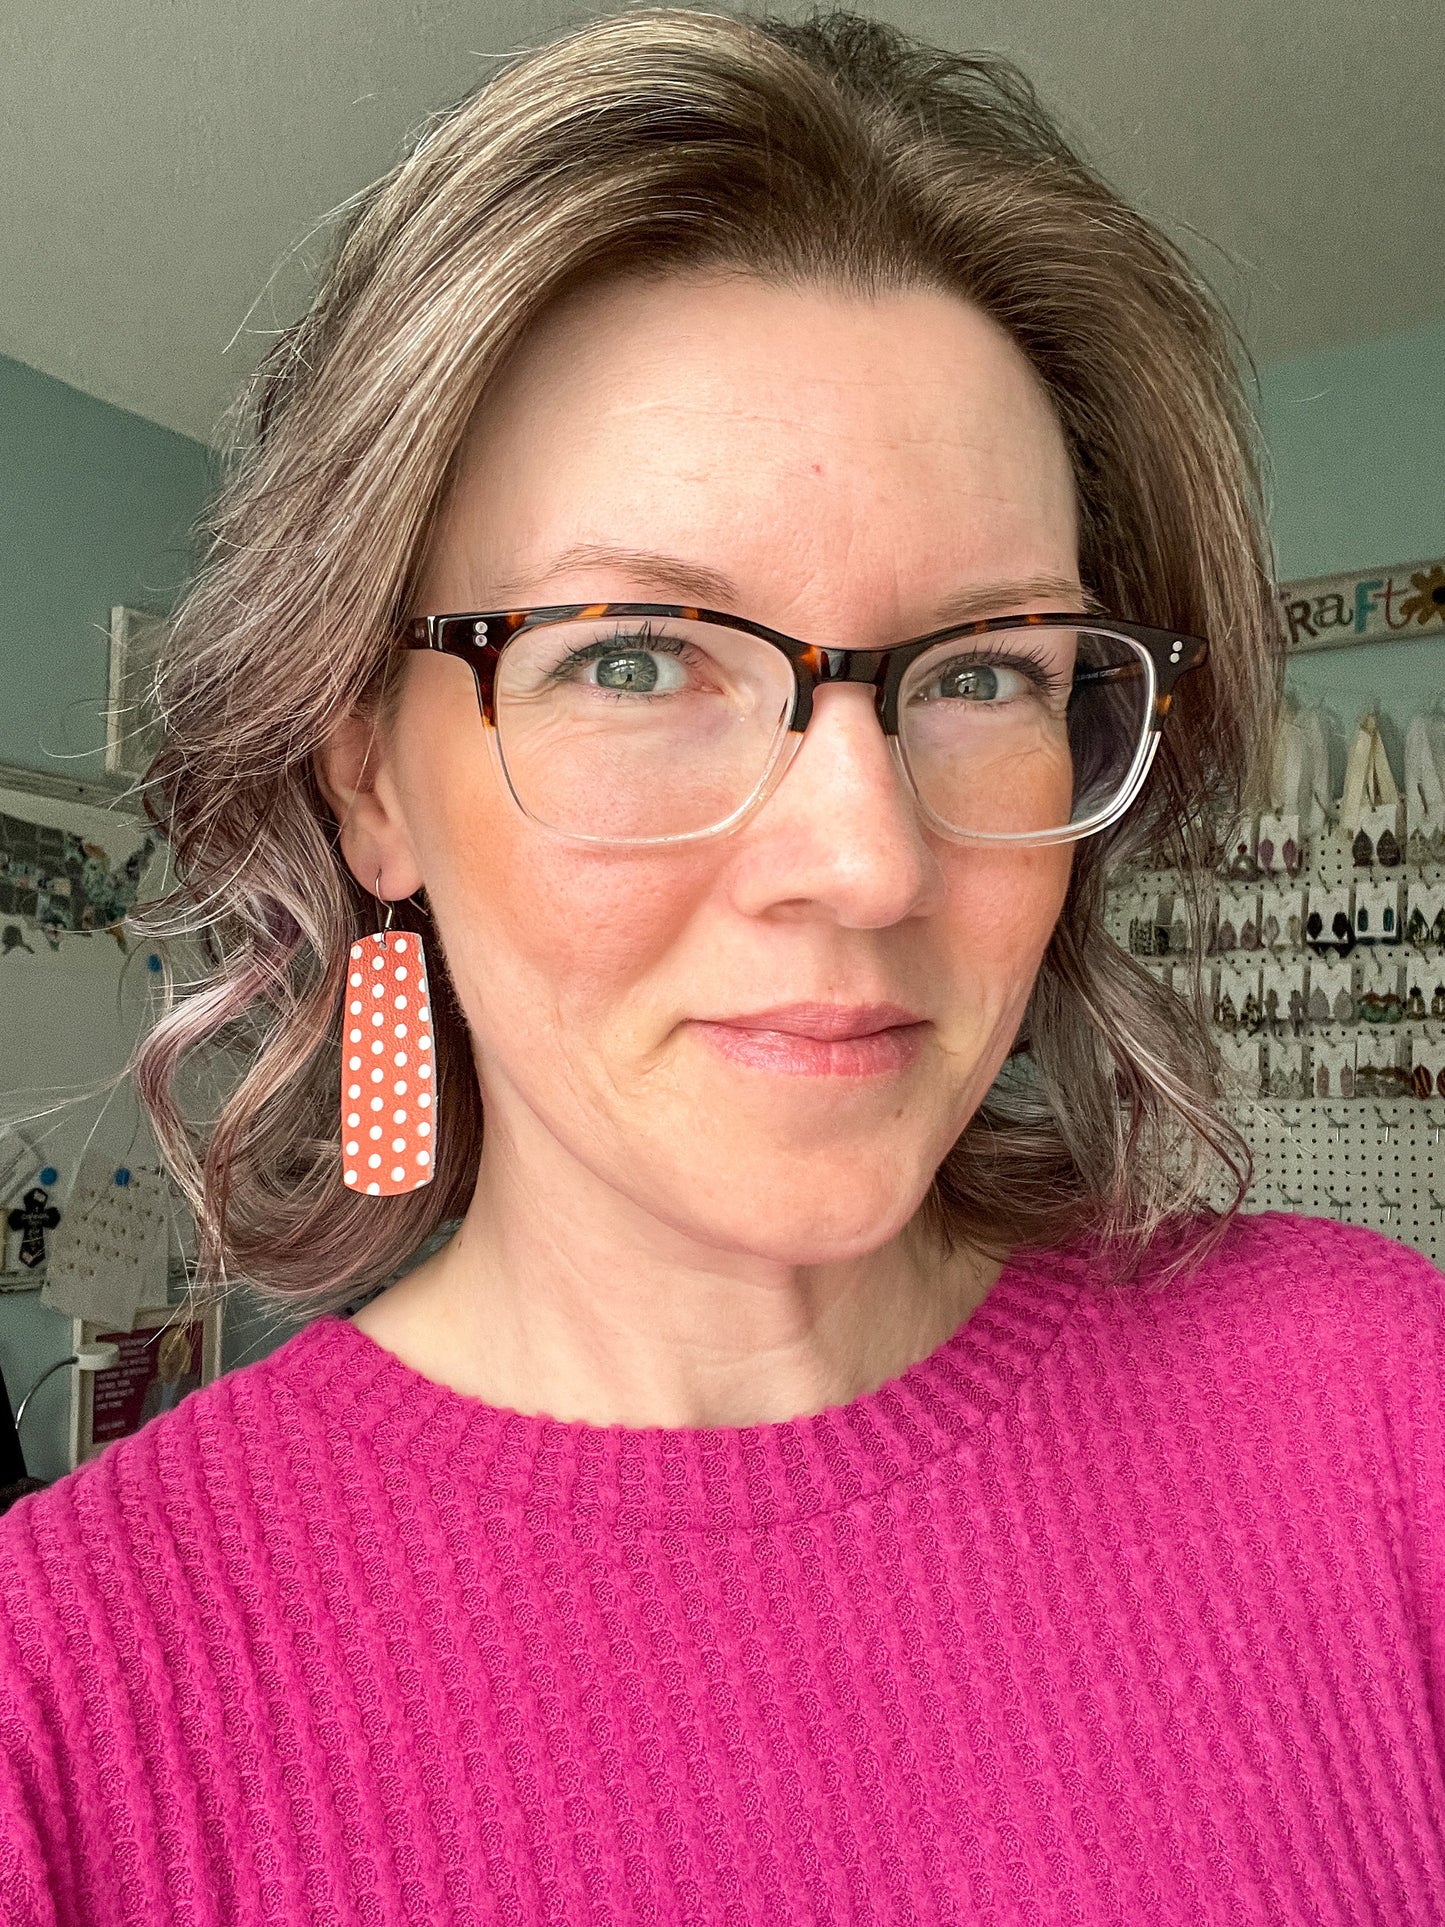 Burnt Orange/Red & White Polka Dotted Leather Earrings: Choose From 3 Styles - ONLY ONE OF EACH LEFT